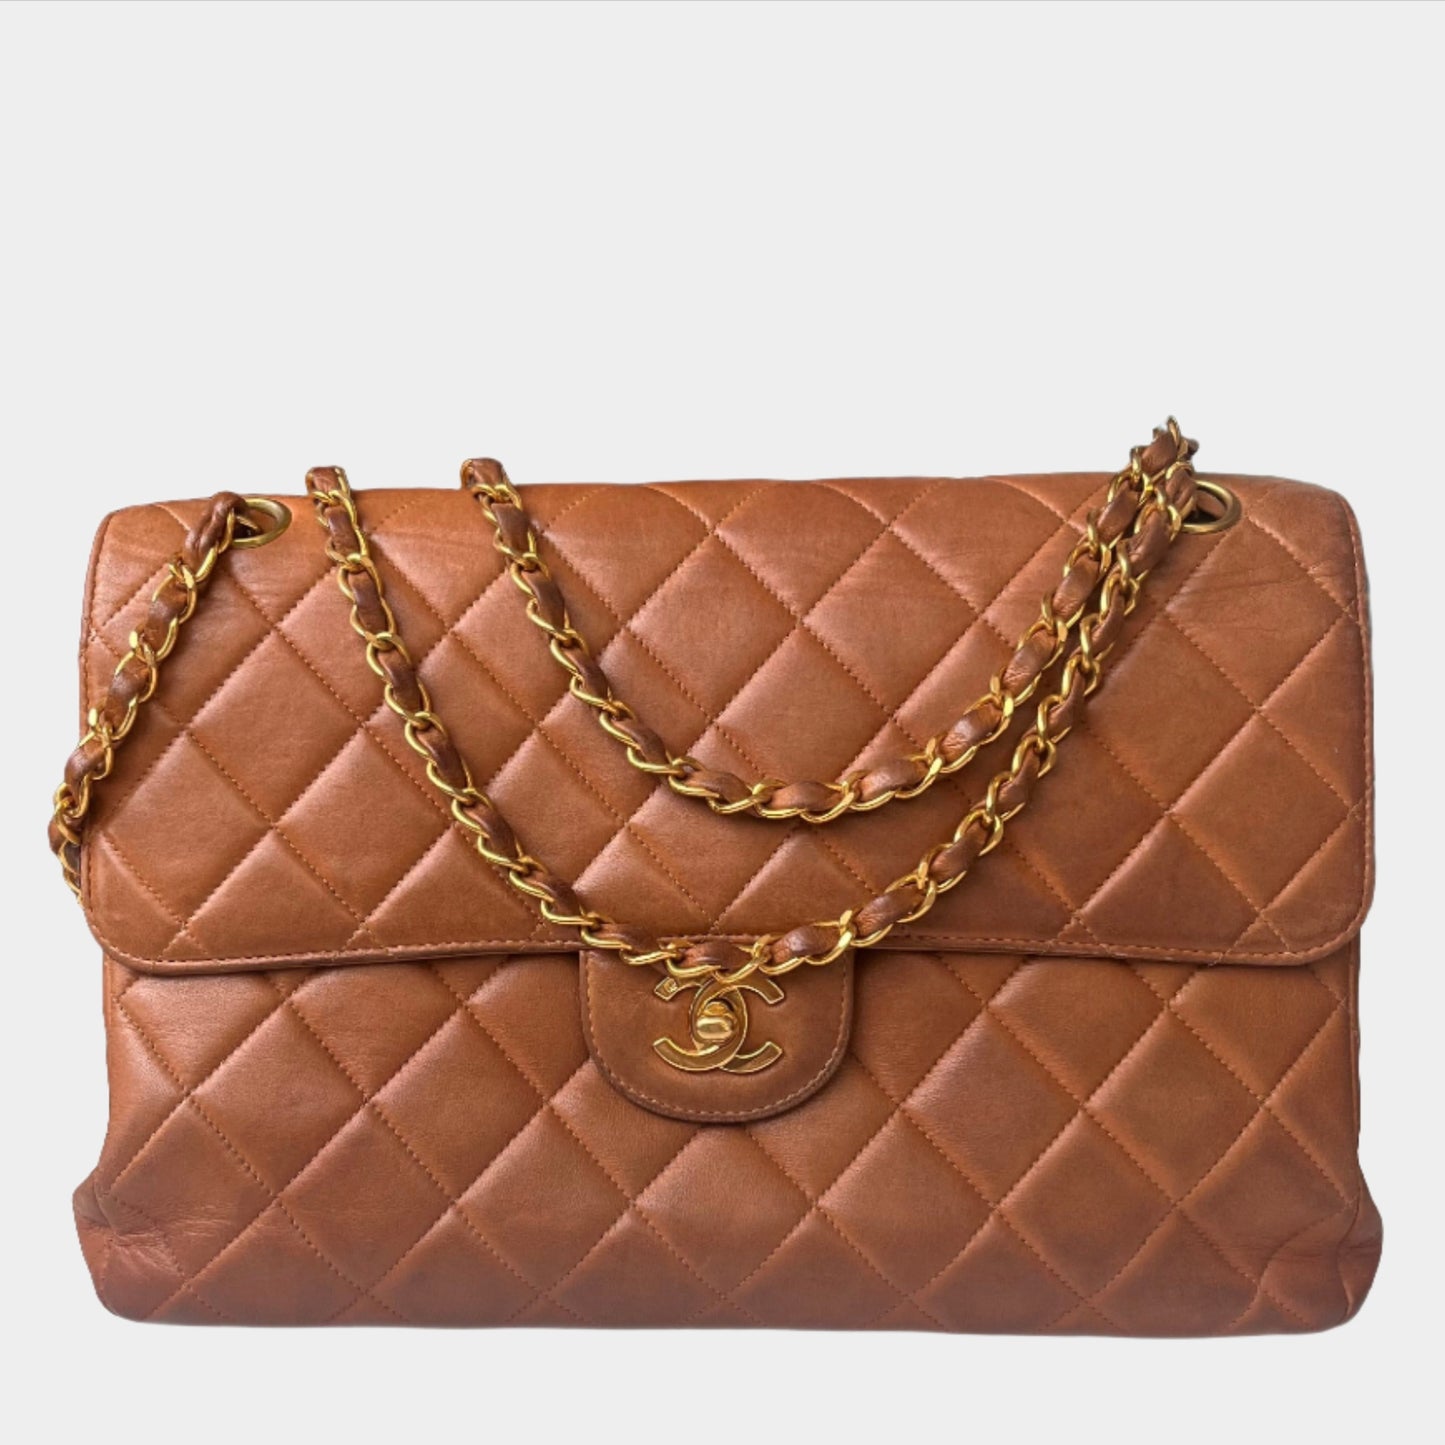 Chanel Double Sided Classic Flap Caramel Leather Handbag-Luxbags